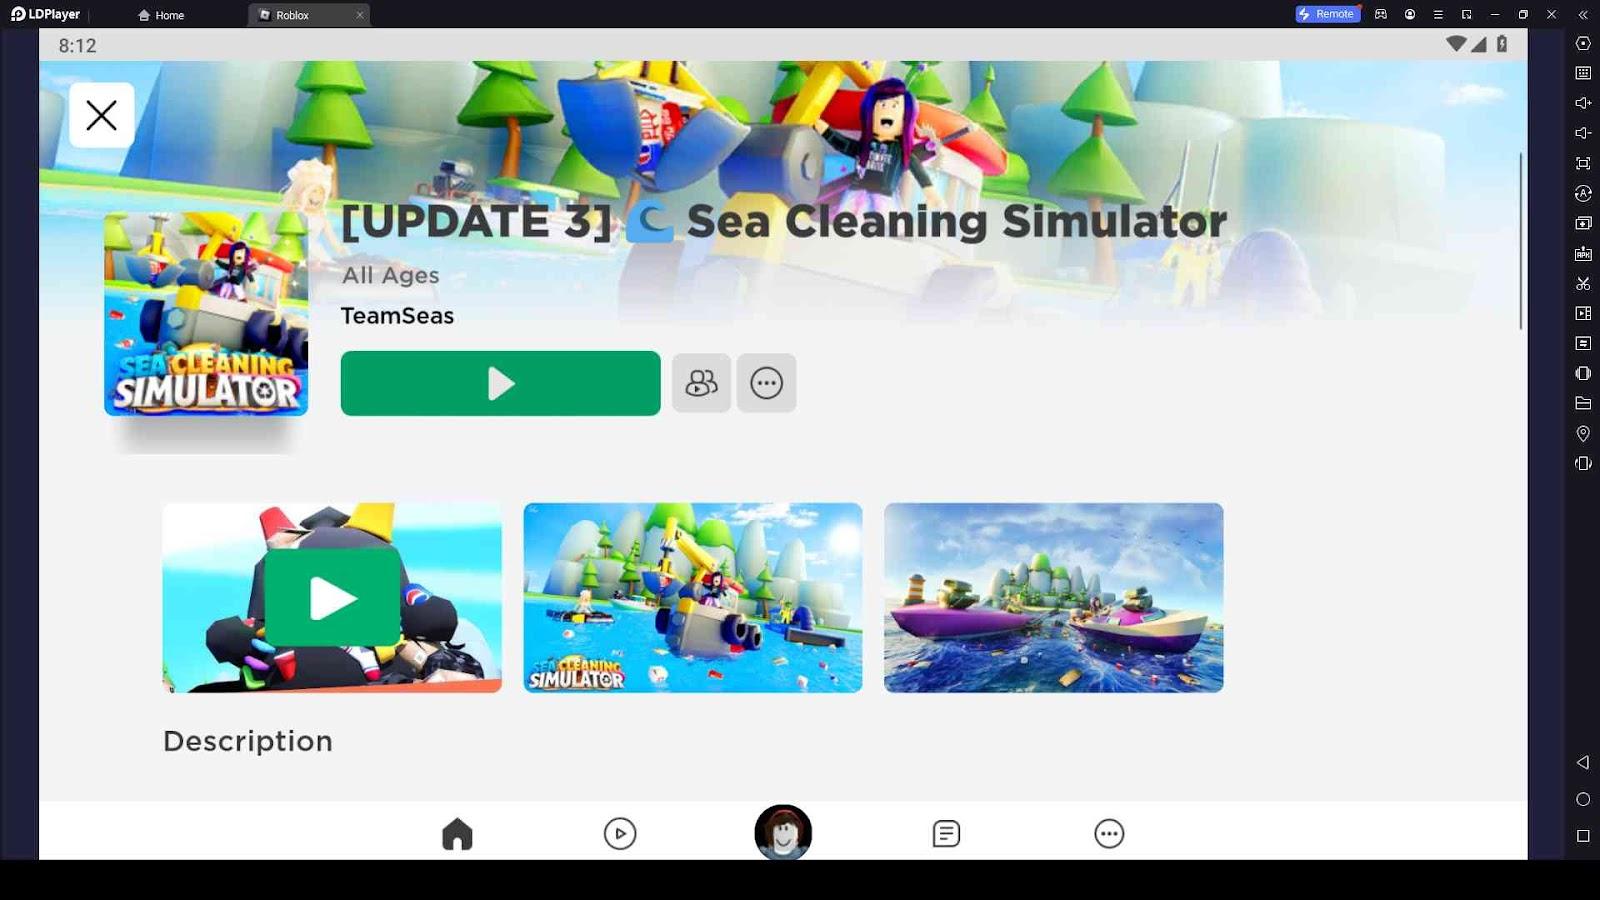 Sea Cleaning Simulator codes – free boosts, currency, and more